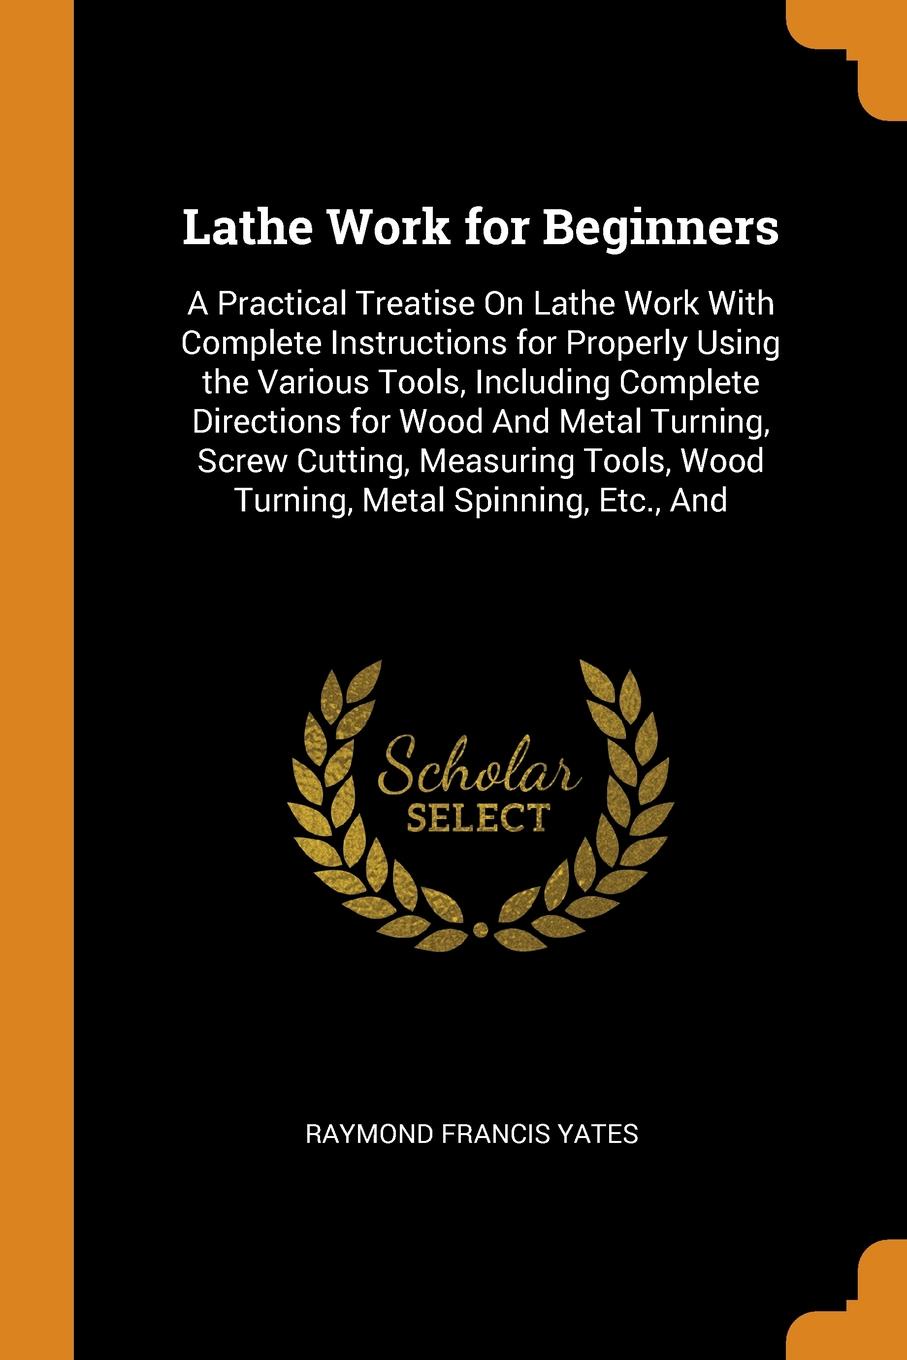 Lathe Work for Beginners. A Practical Treatise On Lathe Work With Complete Instructions for Properly Using the Various Tools, Including Complete Directions for Wood And Metal Turning, Screw Cutting, Measuring Tools, Wood Turning, Metal Spinning, E...